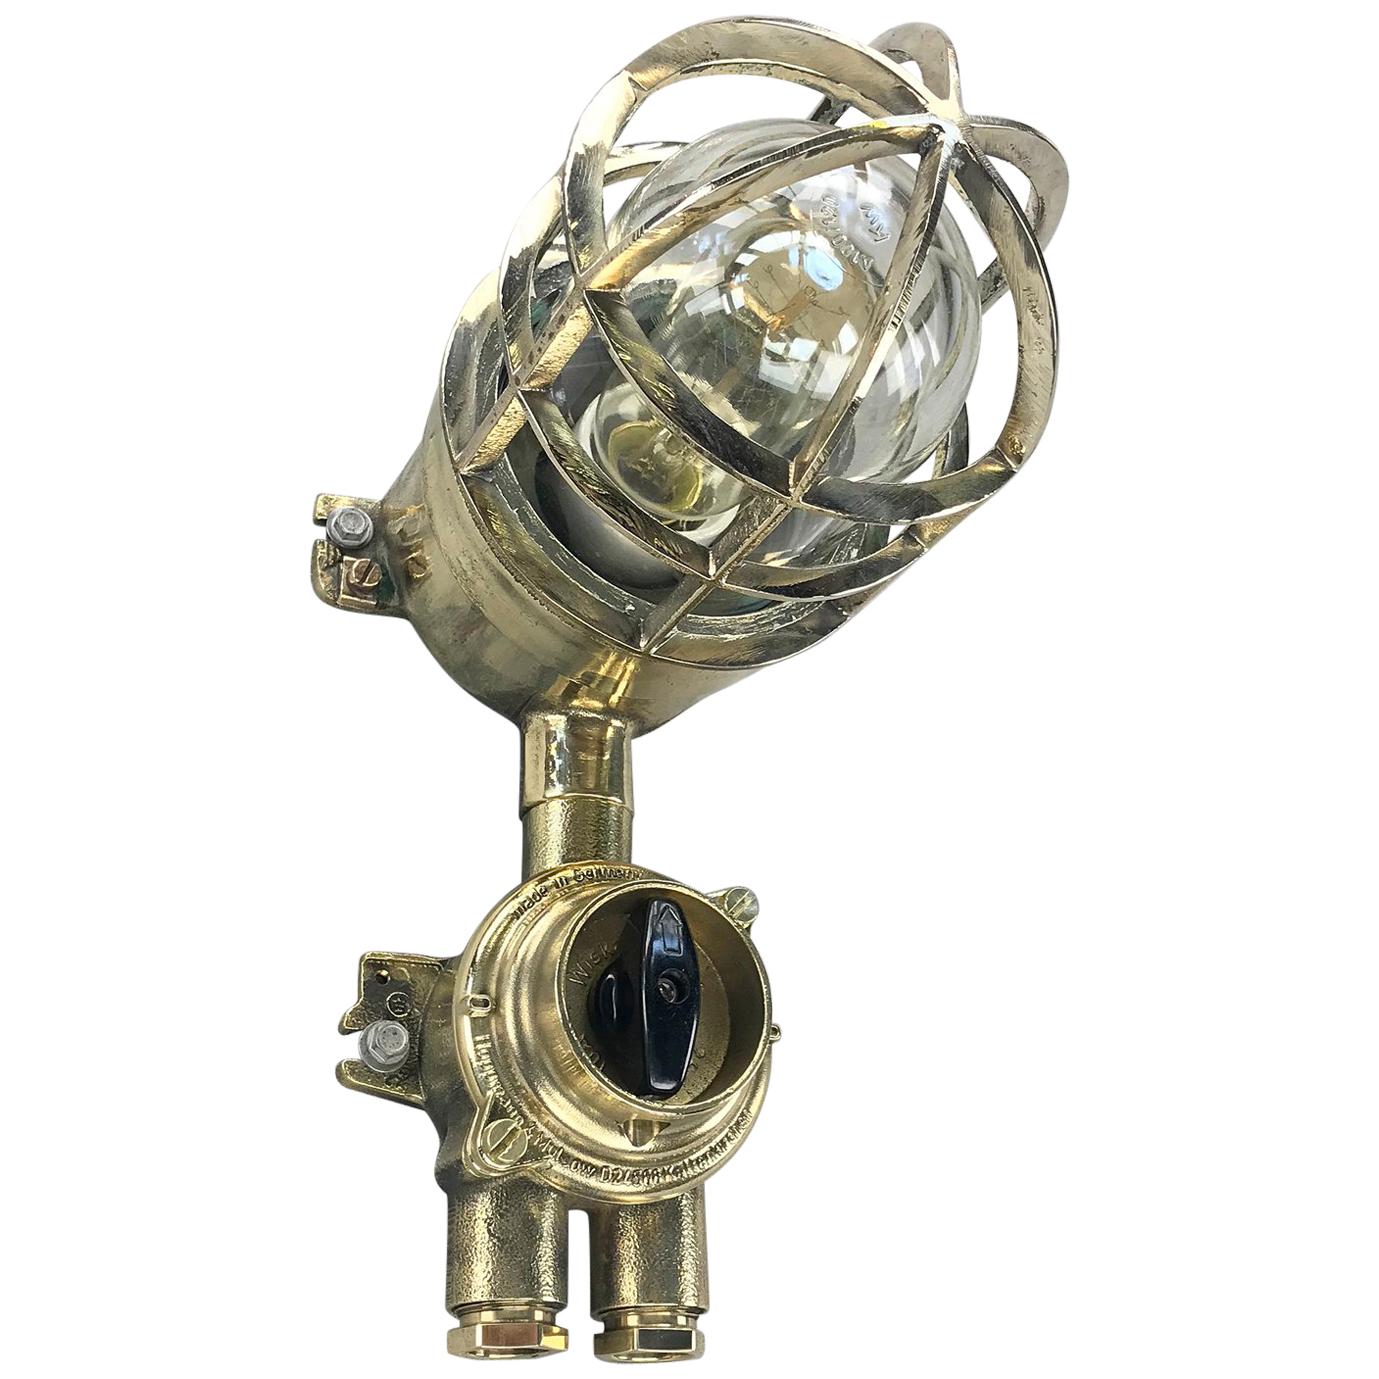 1970s German Explosion Proof Wall Light Cast Brass, Glass Shade & Rotary Switch